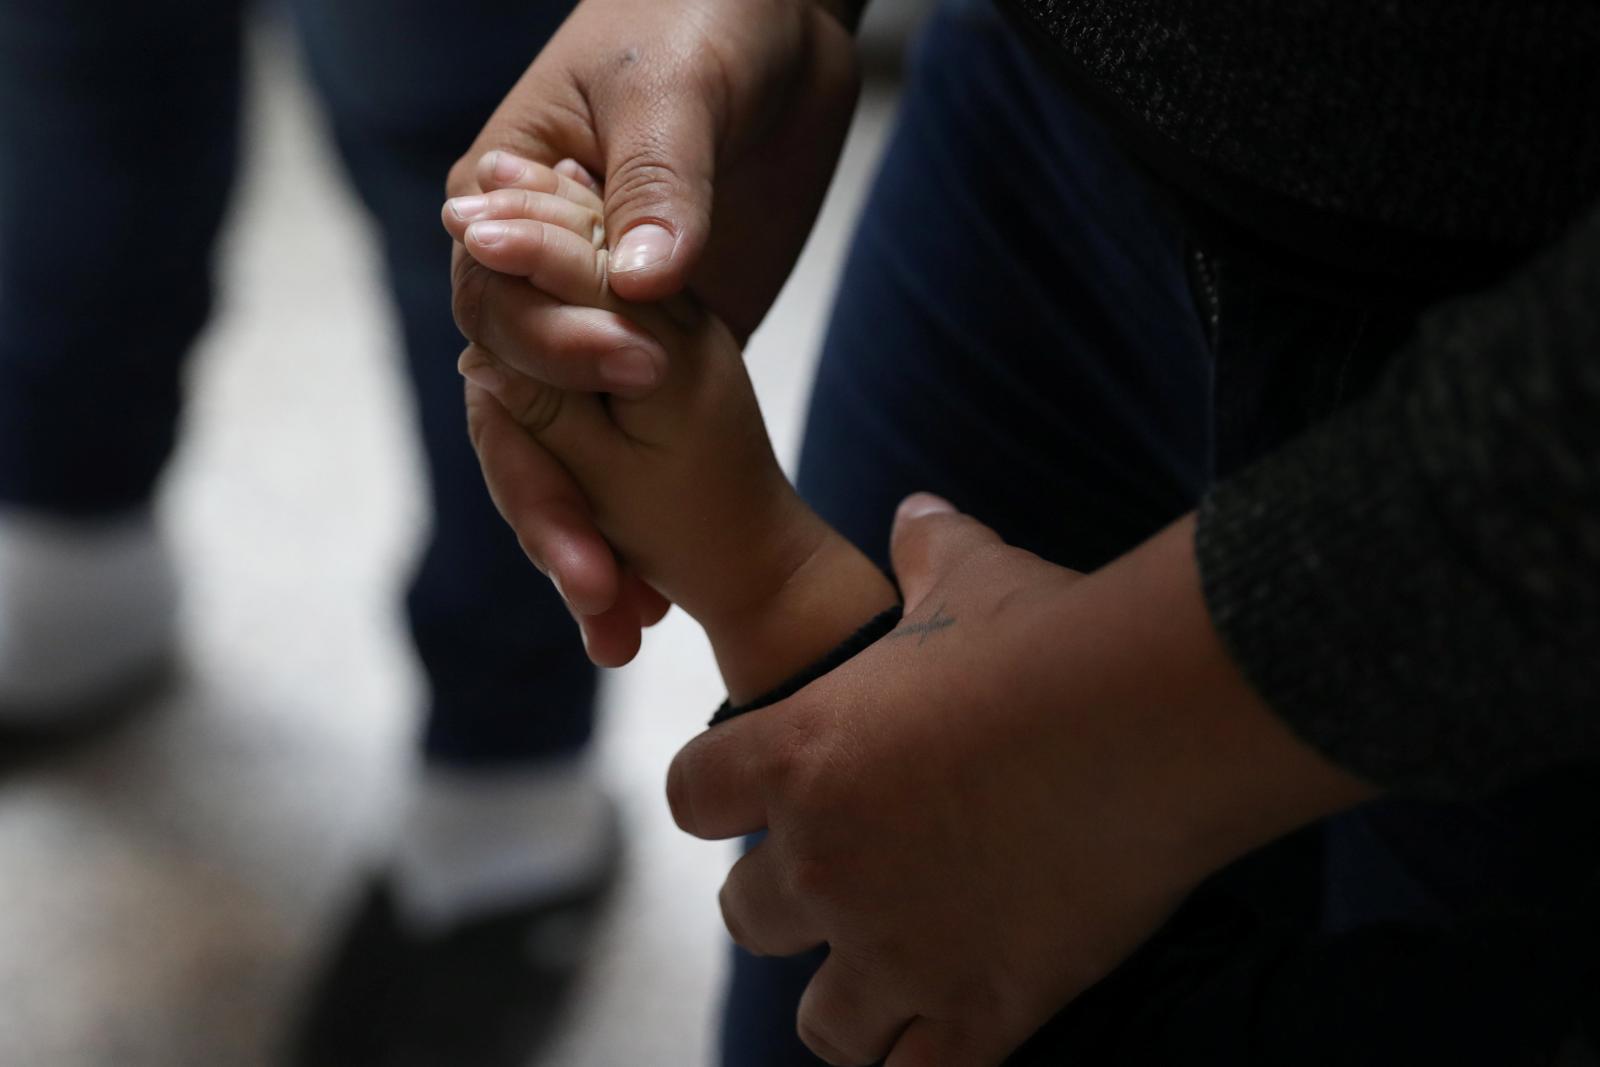 U.S. says still working to reunite 2,053 children with families